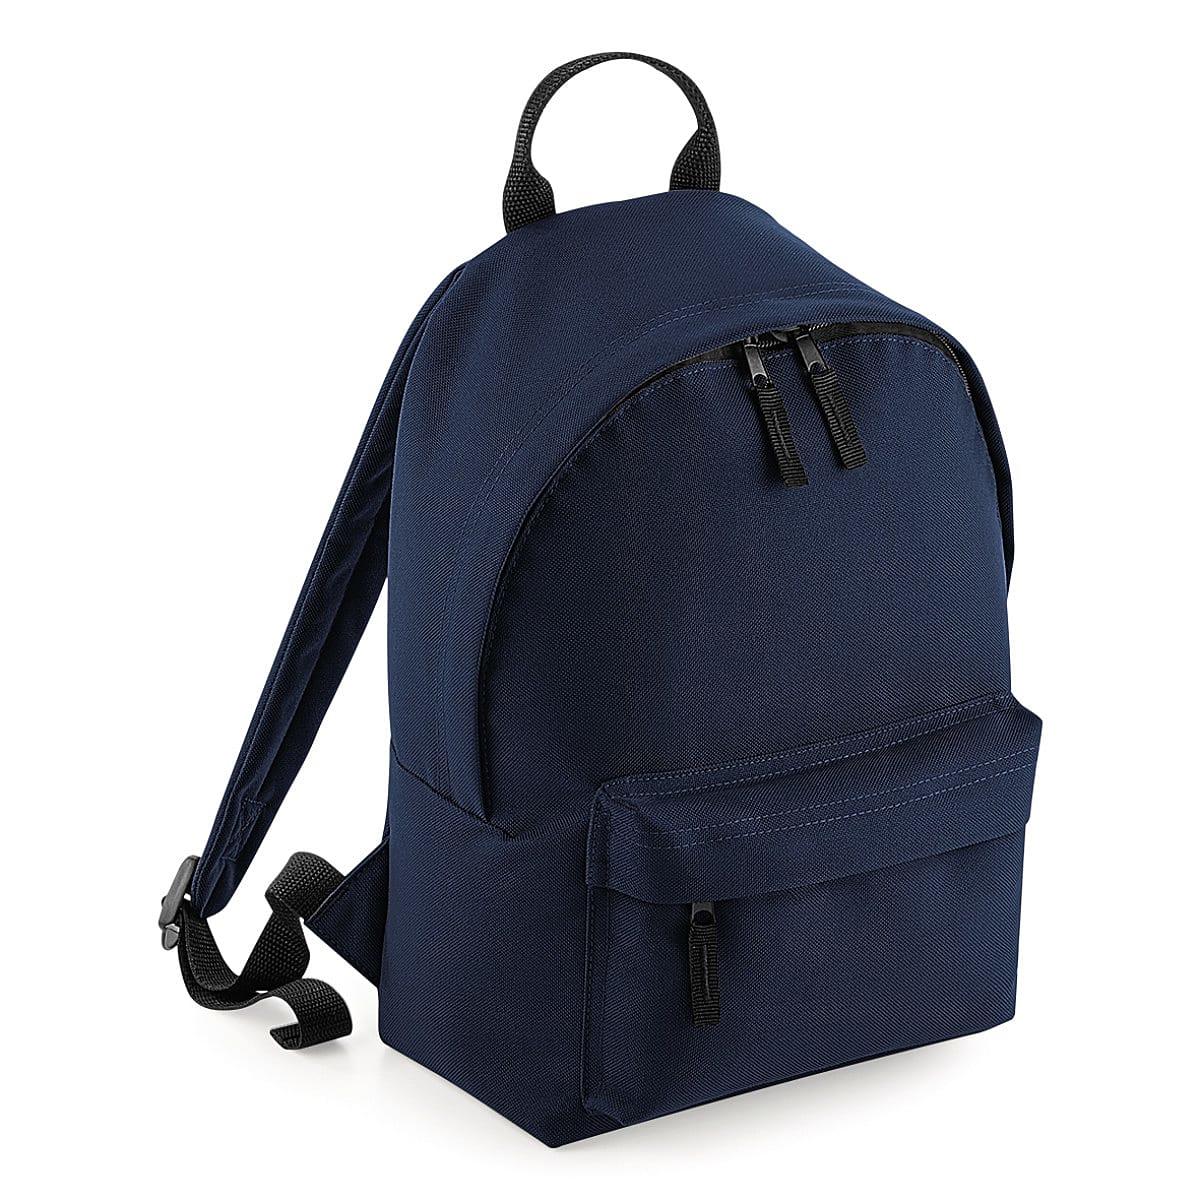 Bagbase Mini Fashion Backpack in French Navy (Product Code: BG125S)